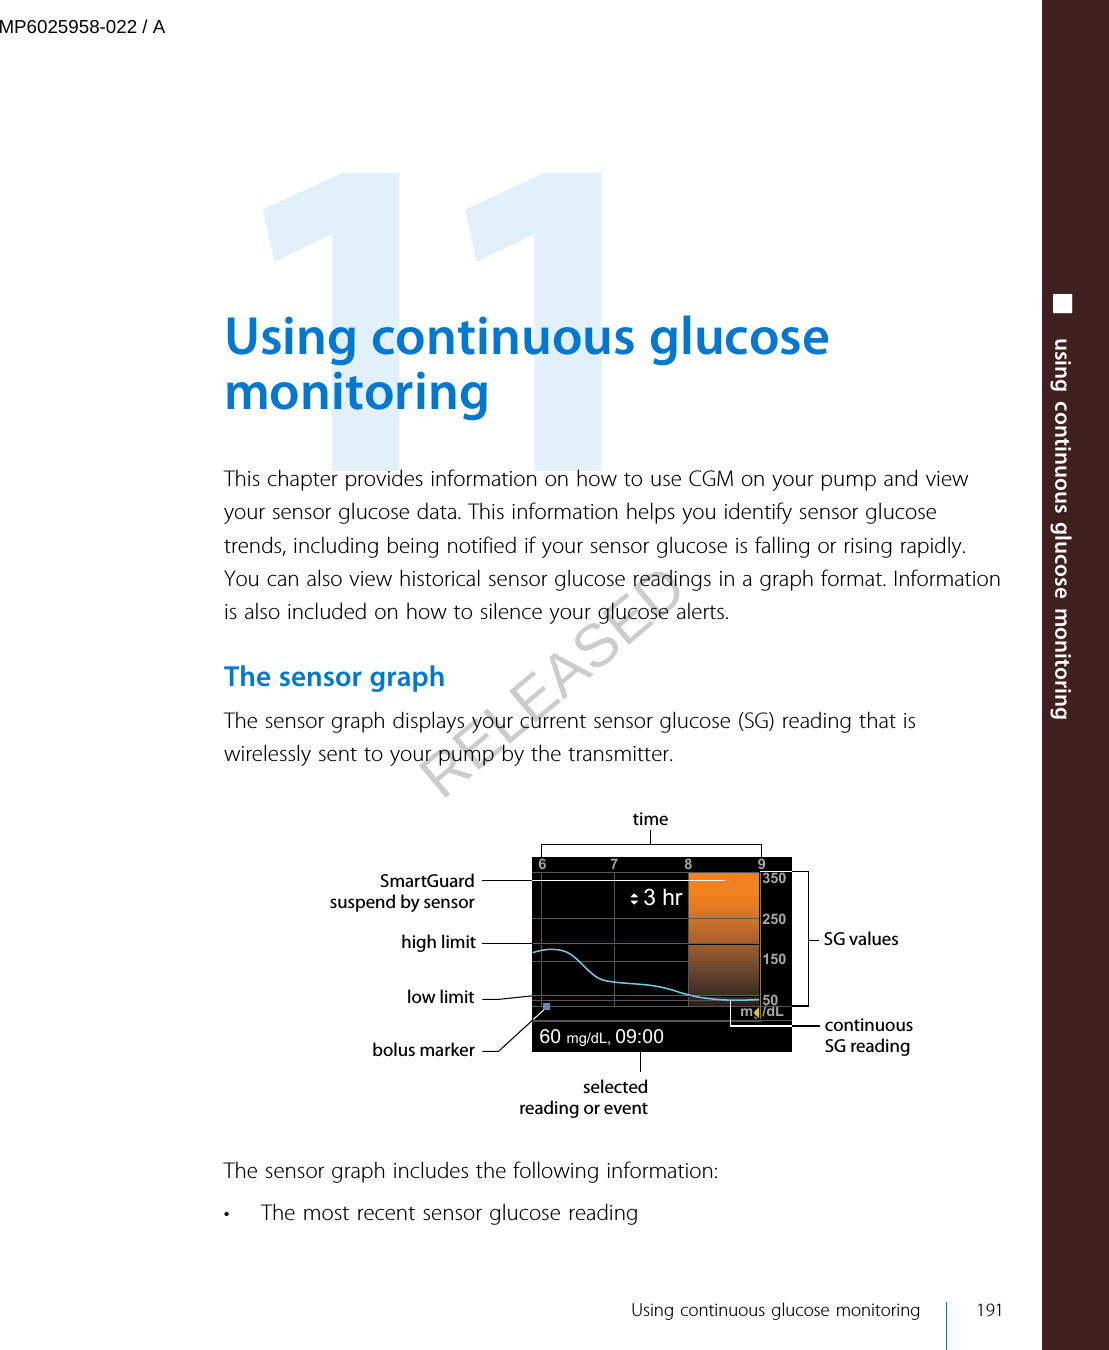  Using continuous glucosemonitoringThis chapter provides information on how to use CGM on your pump and viewyour sensor glucose data. This information helps you identify sensor glucosetrends, including being notified if your sensor glucose is falling or rising rapidly.You can also view historical sensor glucose readings in a graph format. Informationis also included on how to silence your glucose alerts.The sensor graphThe sensor graph displays your current sensor glucose (SG) reading that iswirelessly sent to your pump by the transmitter.67 835025015050mg/dL60 mg/dL, 09:003 hr9SG valueshigh limitSmartGuardsuspend by sensortimelow limitbolus markercontinuous SG readingselected reading or eventThe sensor graph includes the following information:• The most recent sensor glucose reading Using continuous glucose monitoring 191■ using continuous glucose monitoringMP6025958-022 / ARELEASED